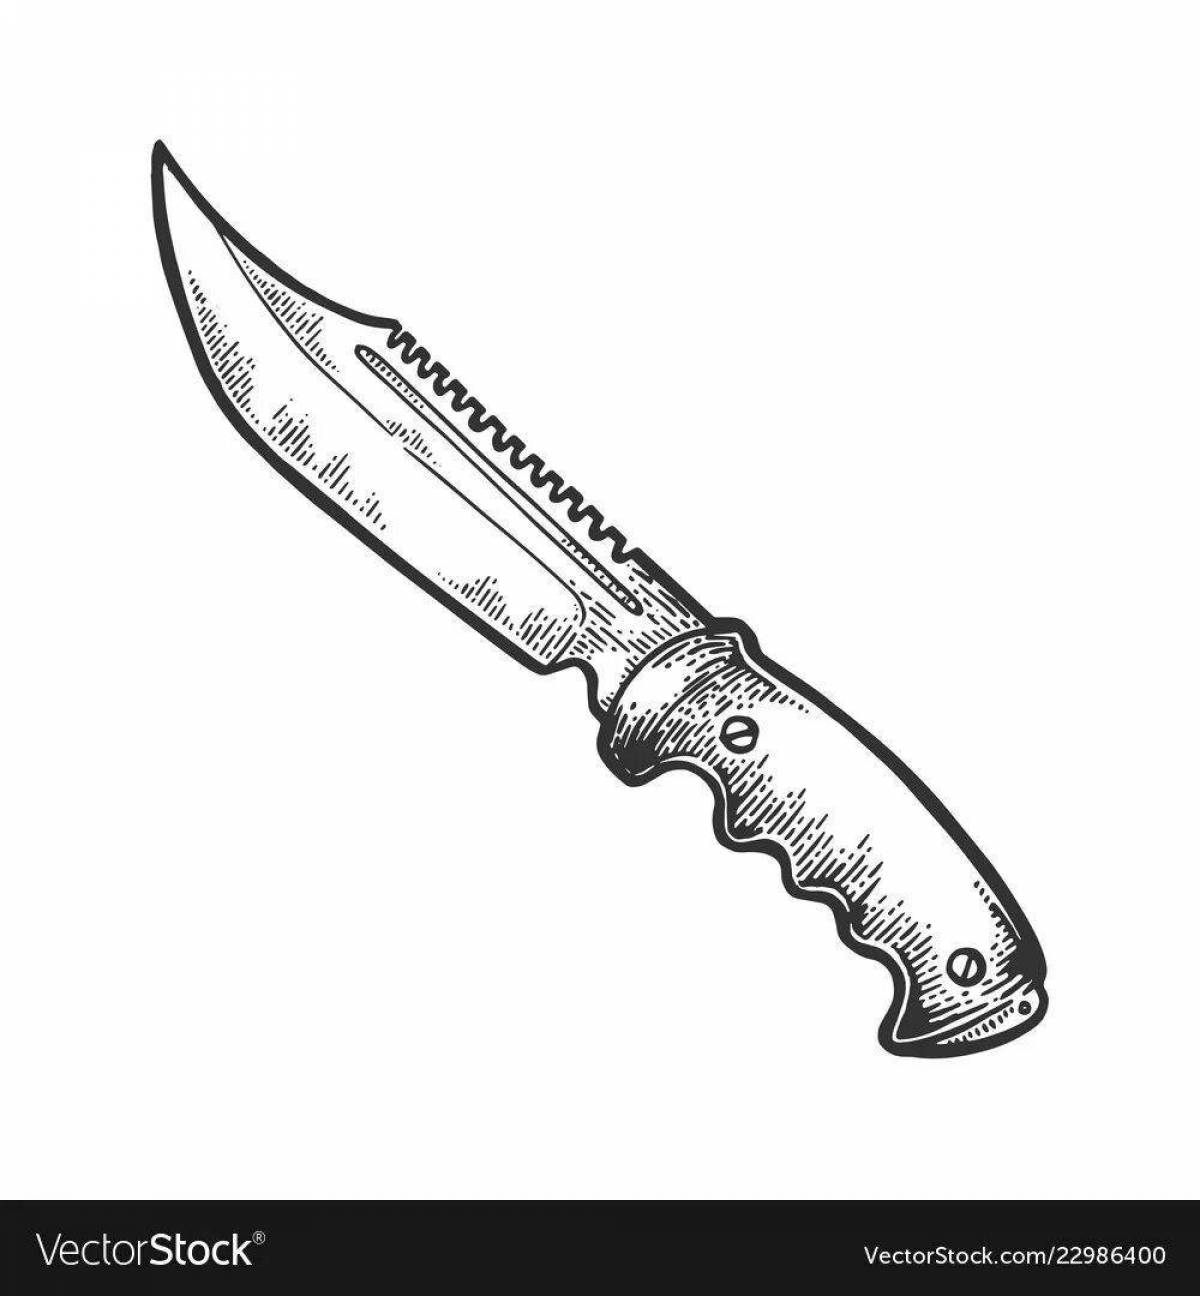 Fun coloring of the scorpion knife from standoff 2